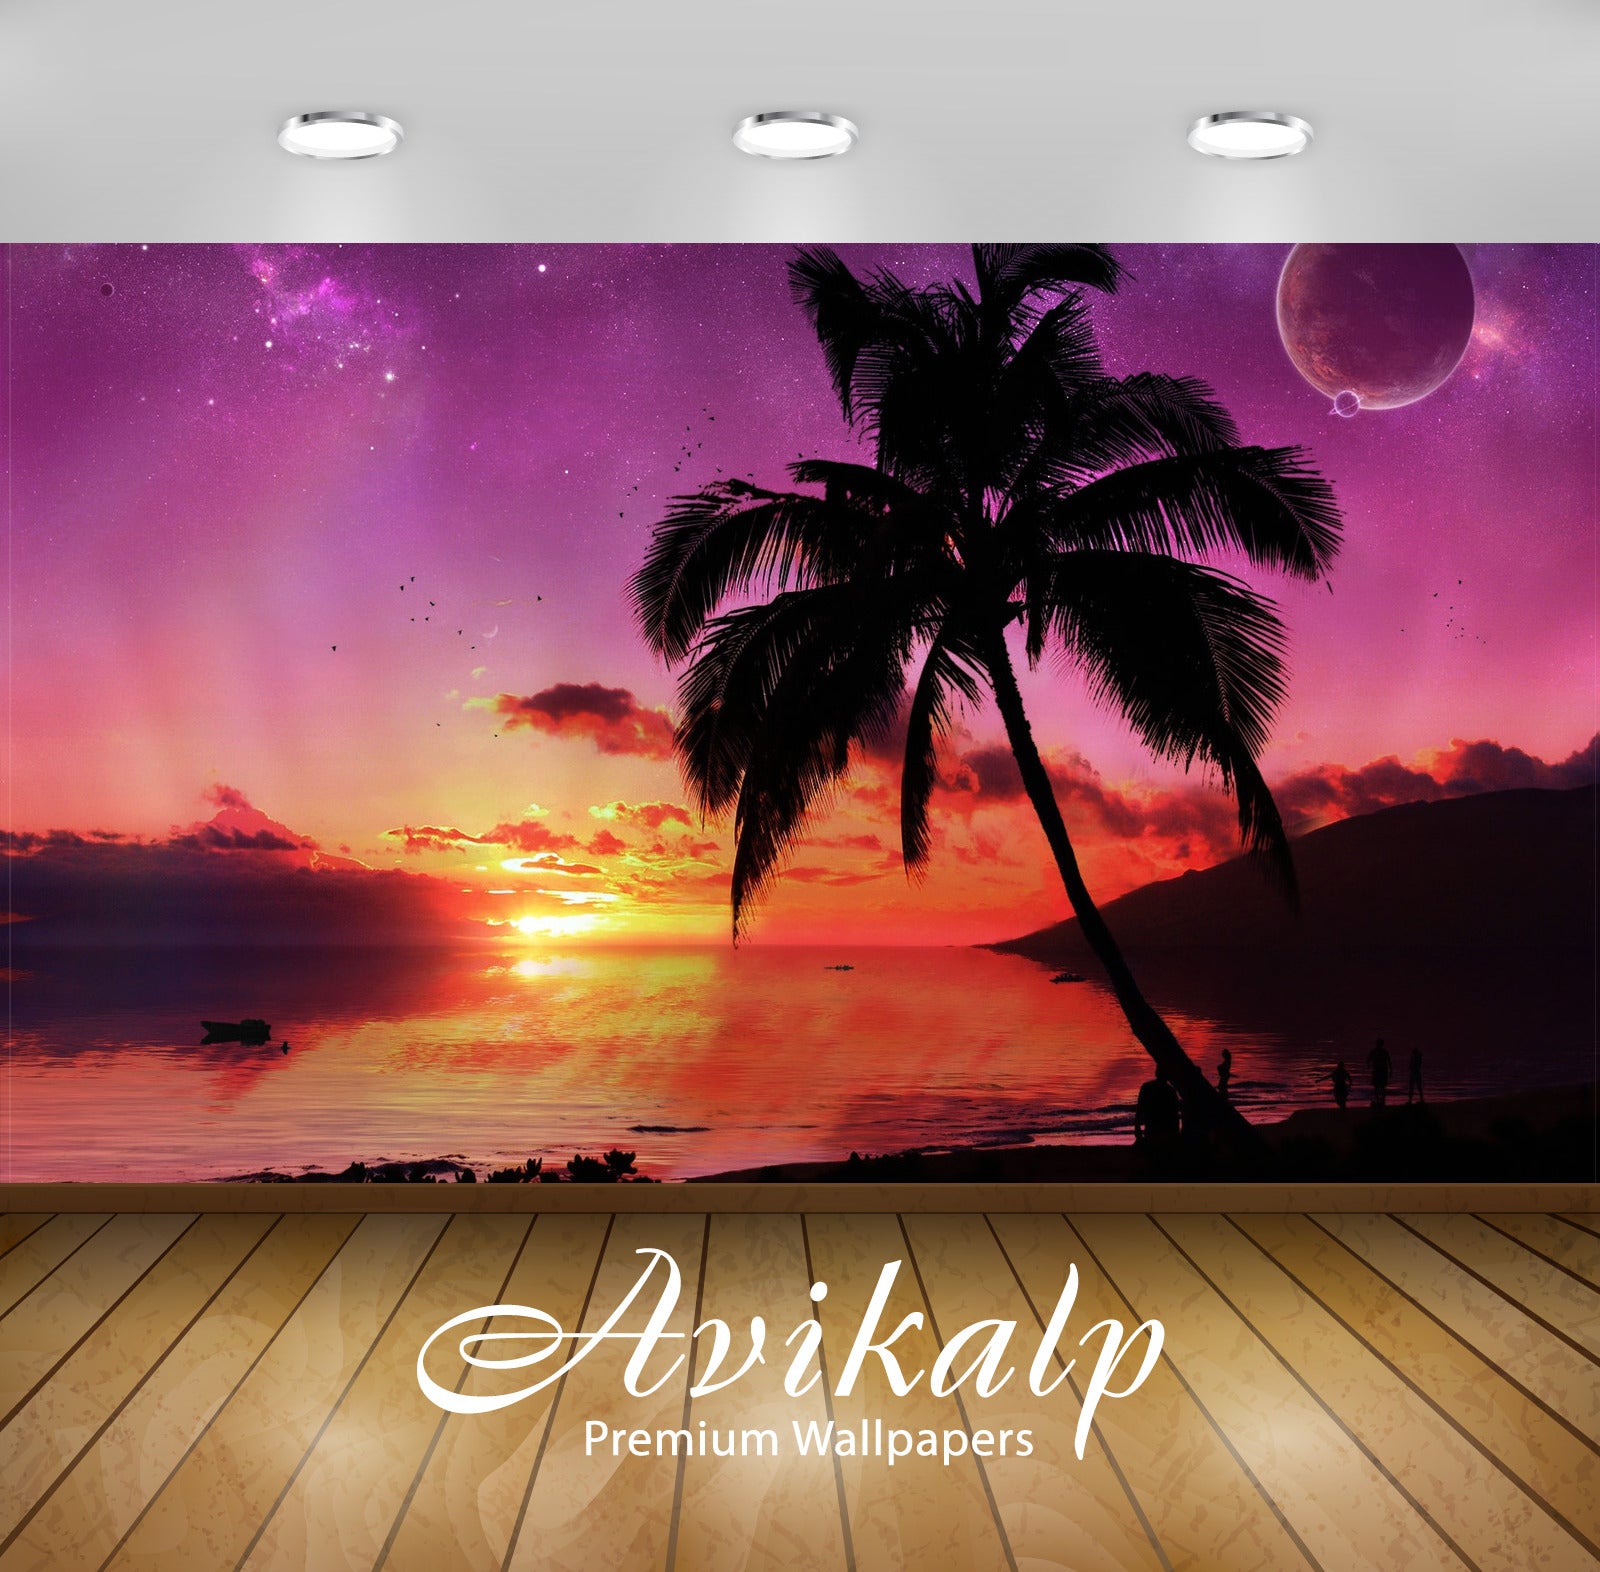 Avikalp Exclusive Awi1842 Beautiful Sunset Full HD Wallpapers for Living room, Hall, Kids Room, Kitc